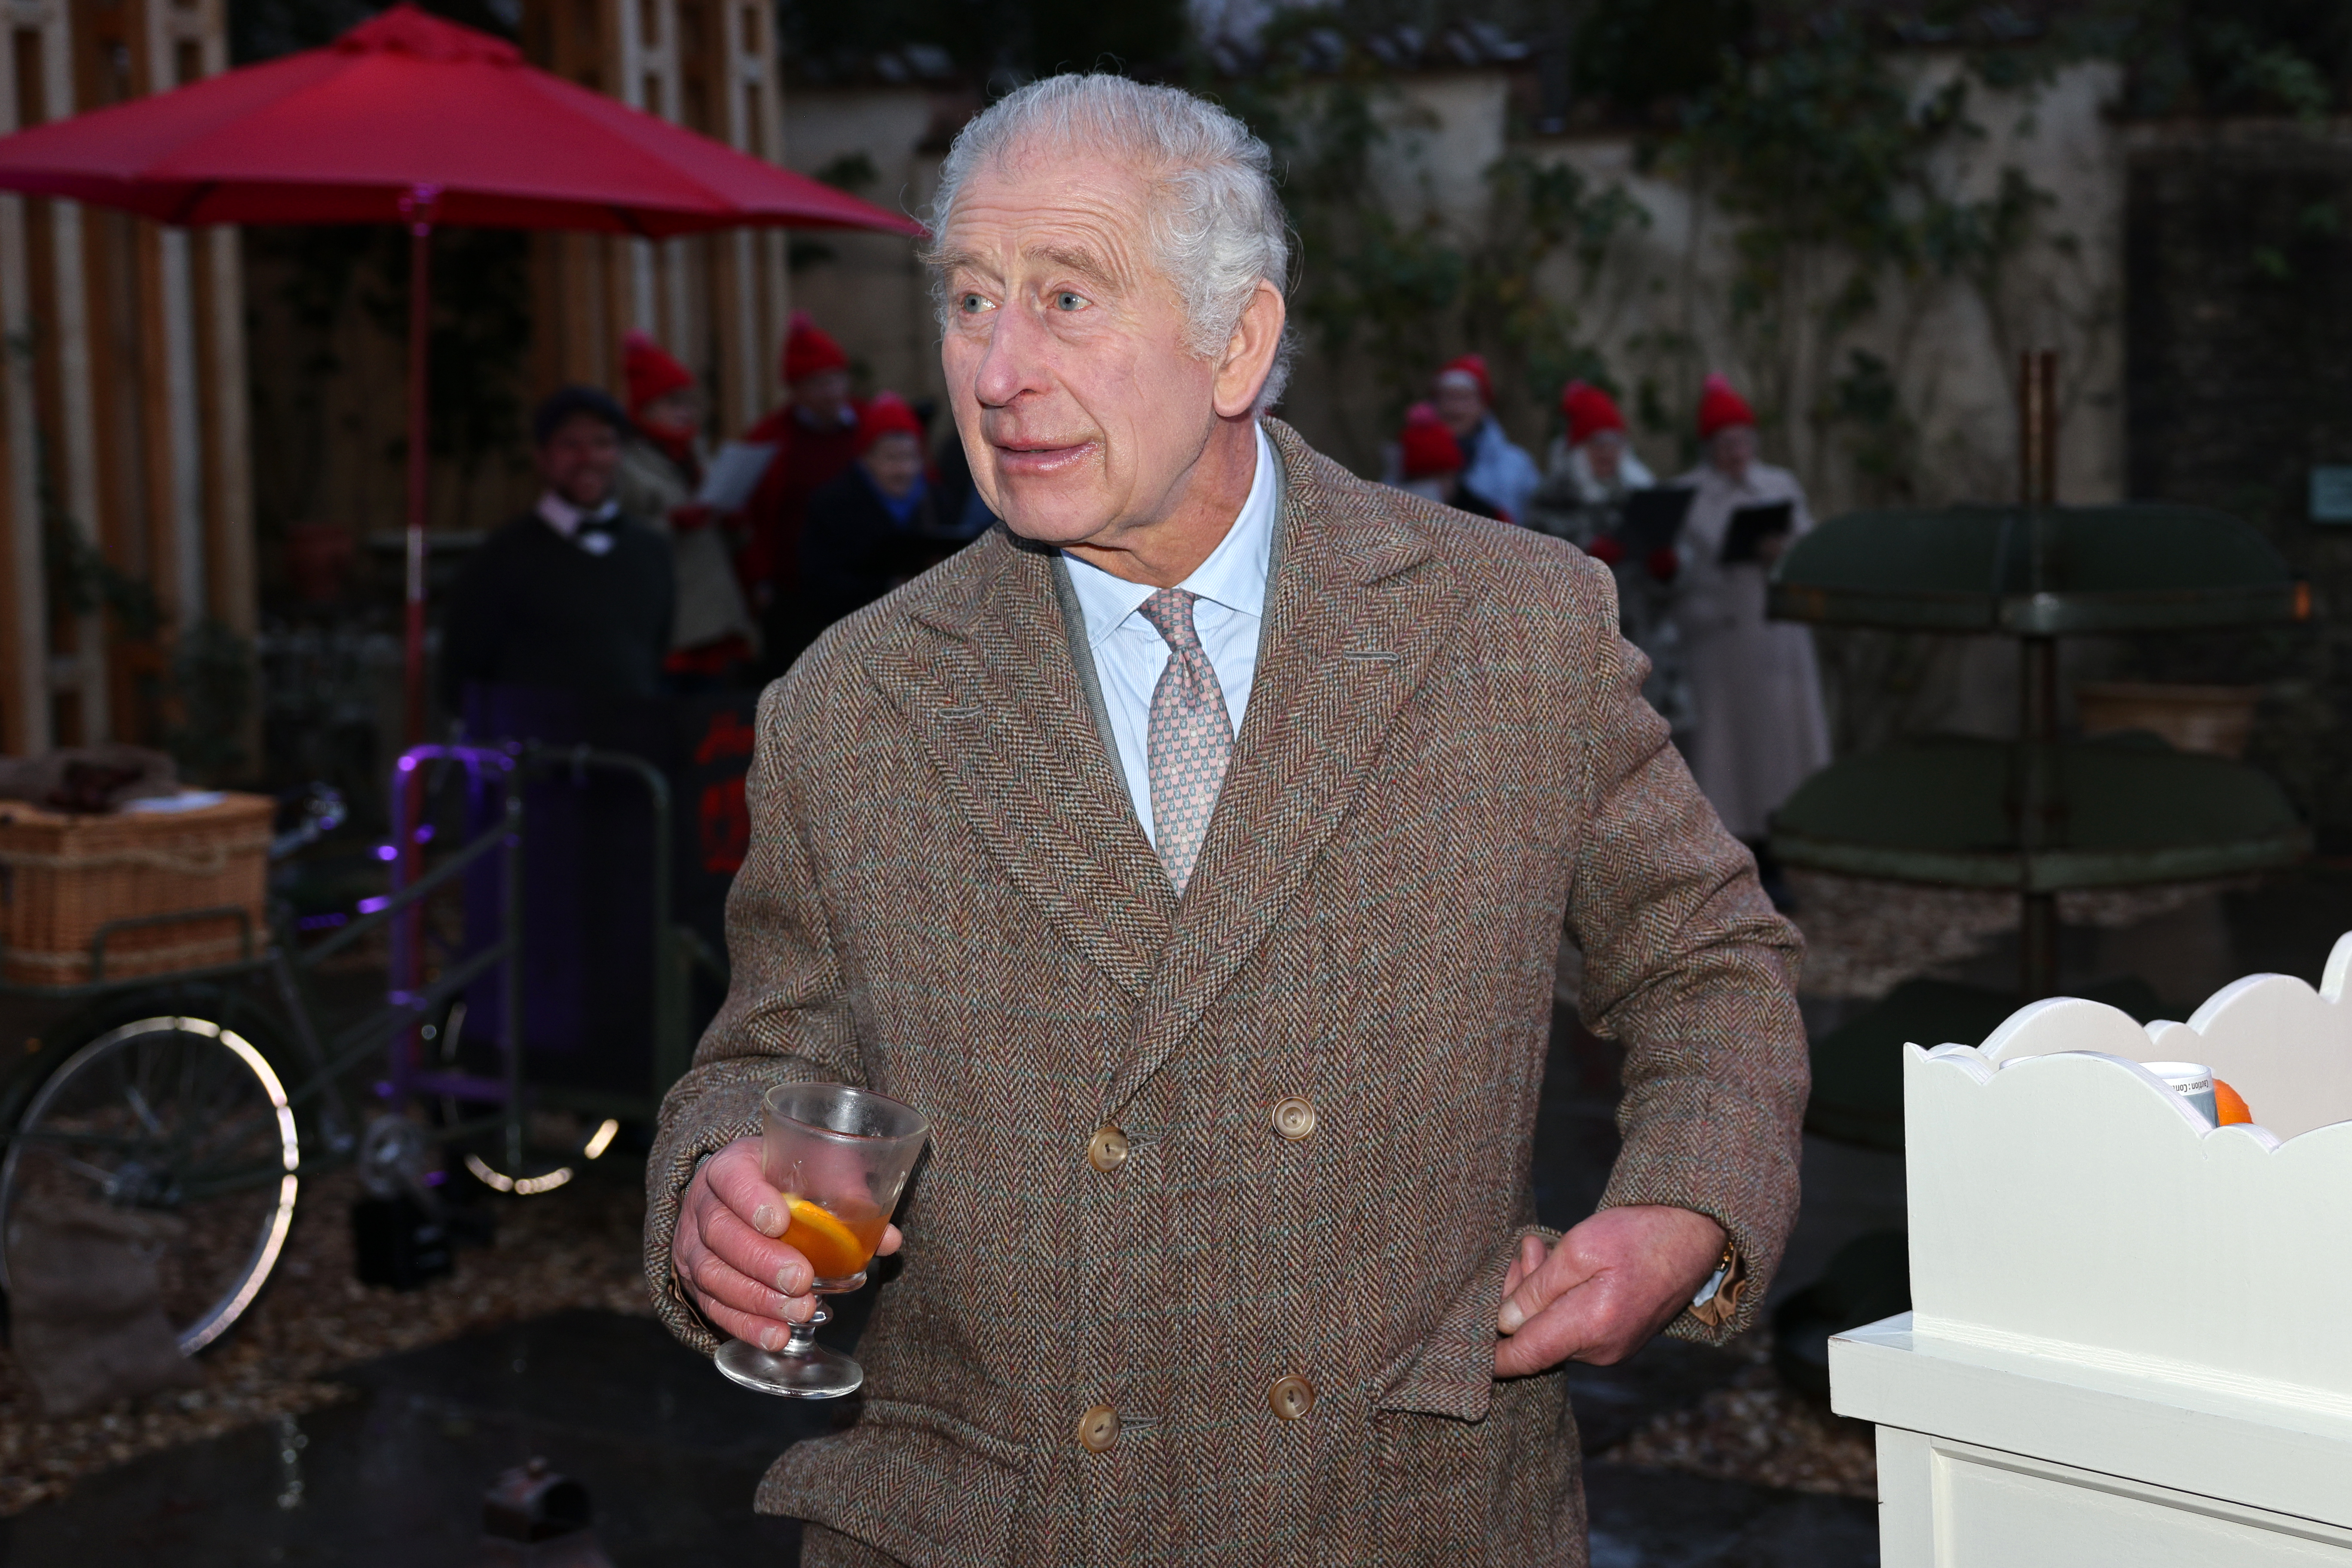 King Charles III at the festive-themed "Celebration of Craft" at Highgrove House in Tetbury, England, on December 8, 2023. | Source: Getty Images